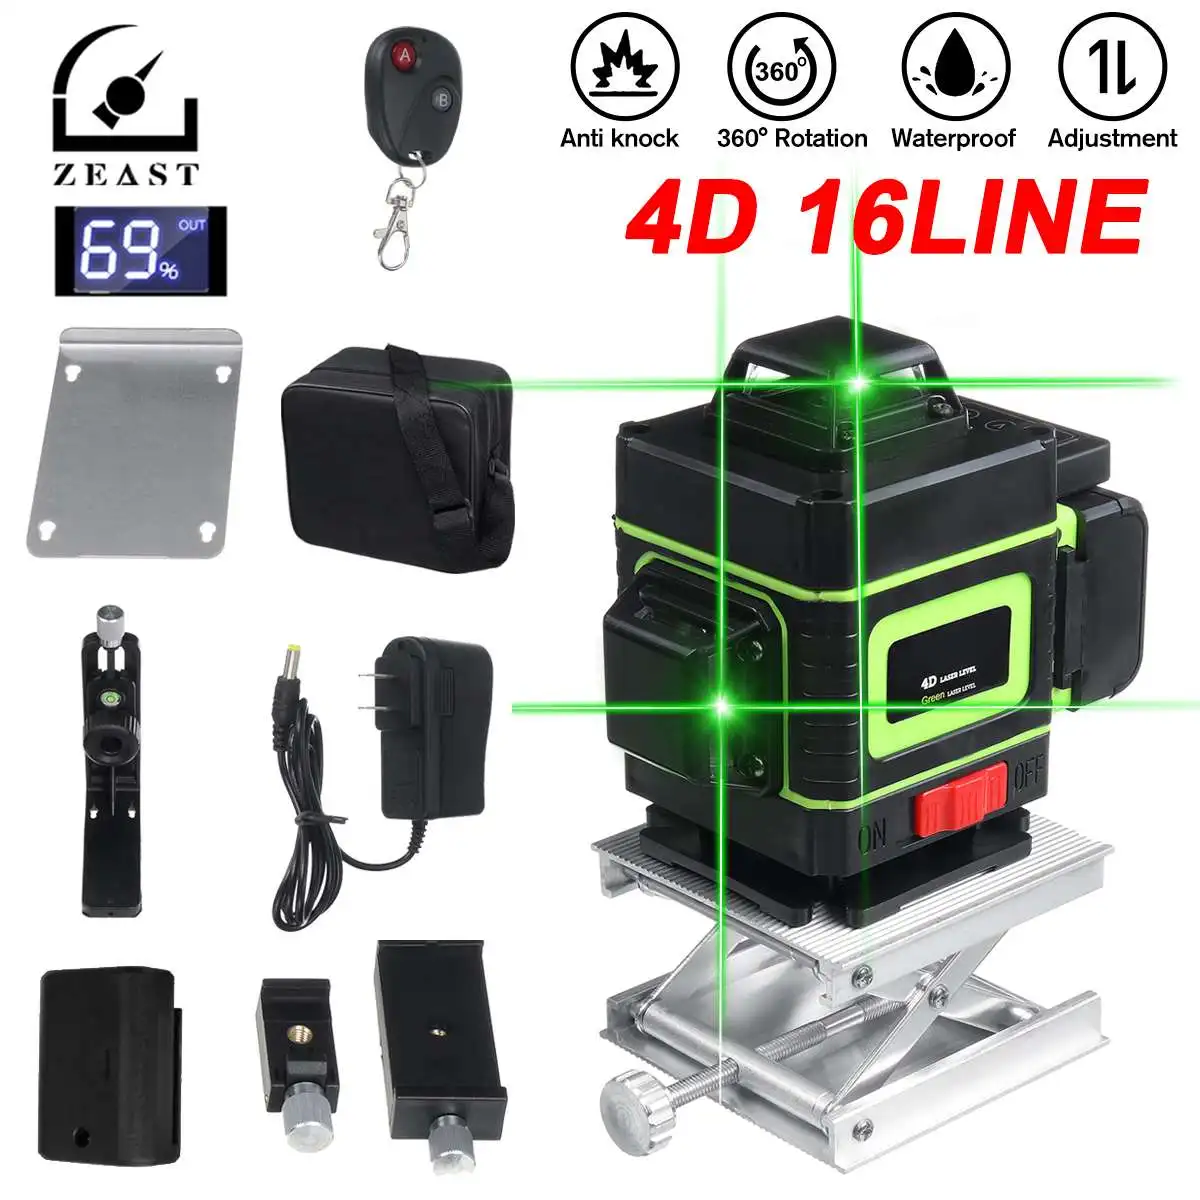 ZEAST 16 Line Green Light Laser Level 3D Remote Control Measure W/Wall Attachment Frame Self-Leveling System Green Beam Laser